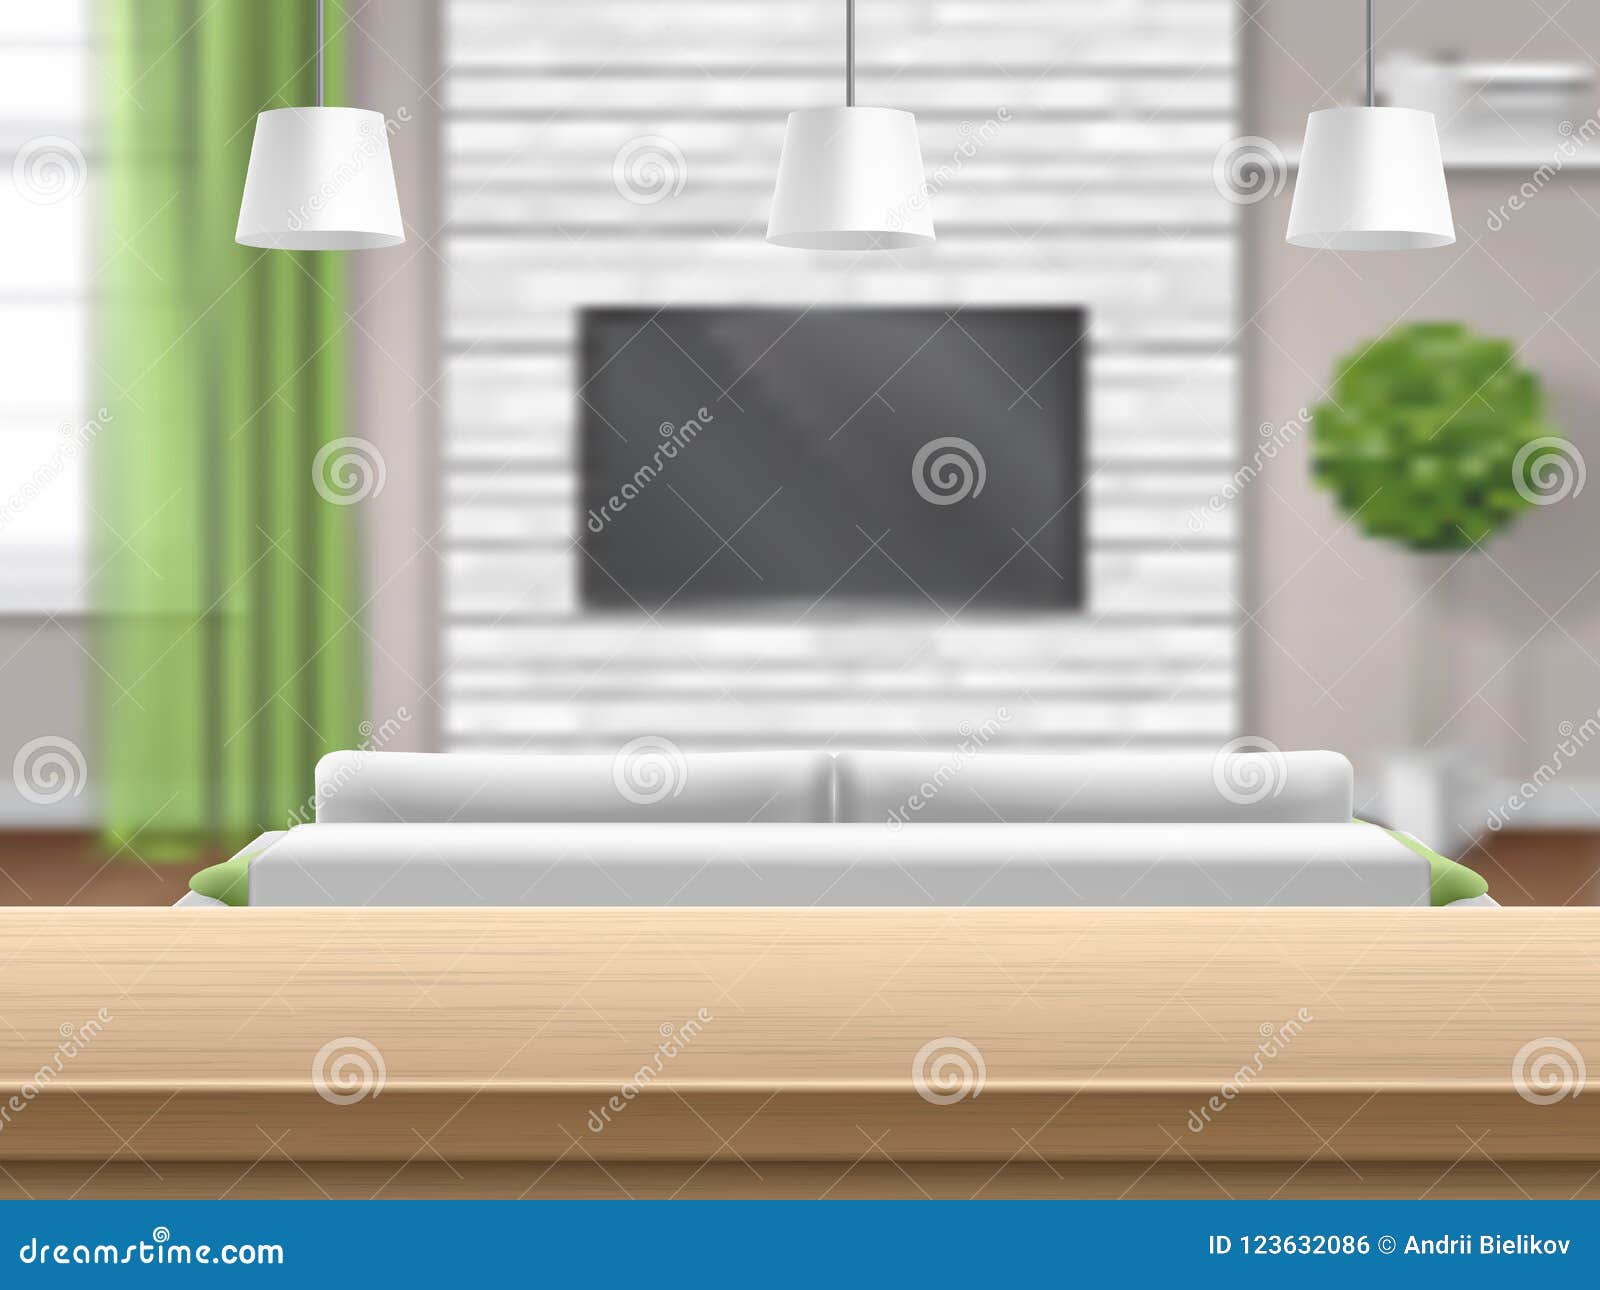 Living Room With Sofa Tv And Wooden Bar Table Stock Vector Illustration Of Shelf